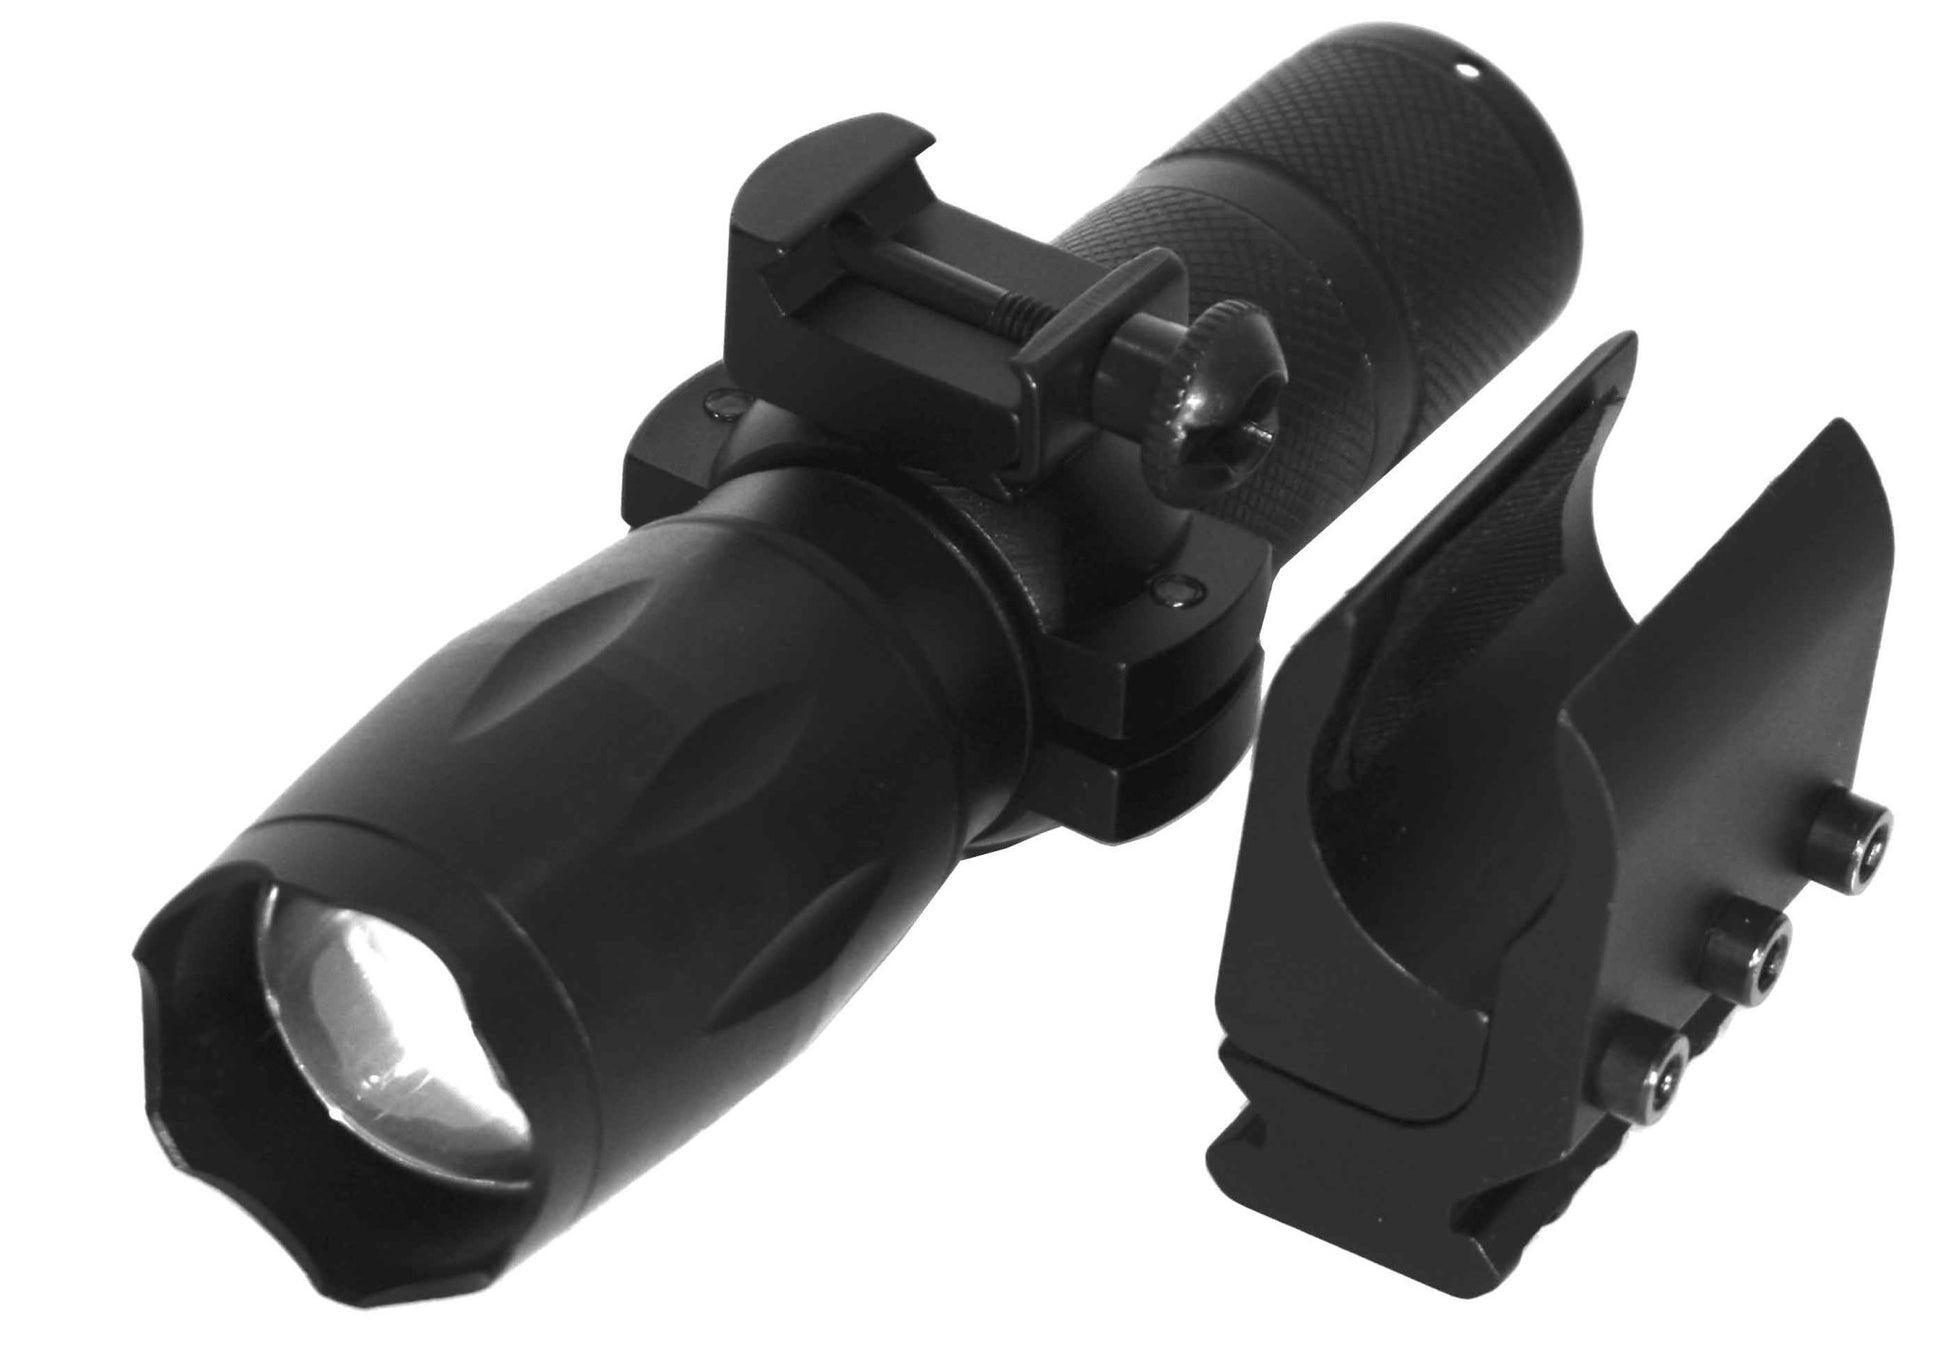 Tactical flashlight 1000 lumen with magazine tube mount compatible with 12 gauge pumps. - TRINITY SUPPLY INC